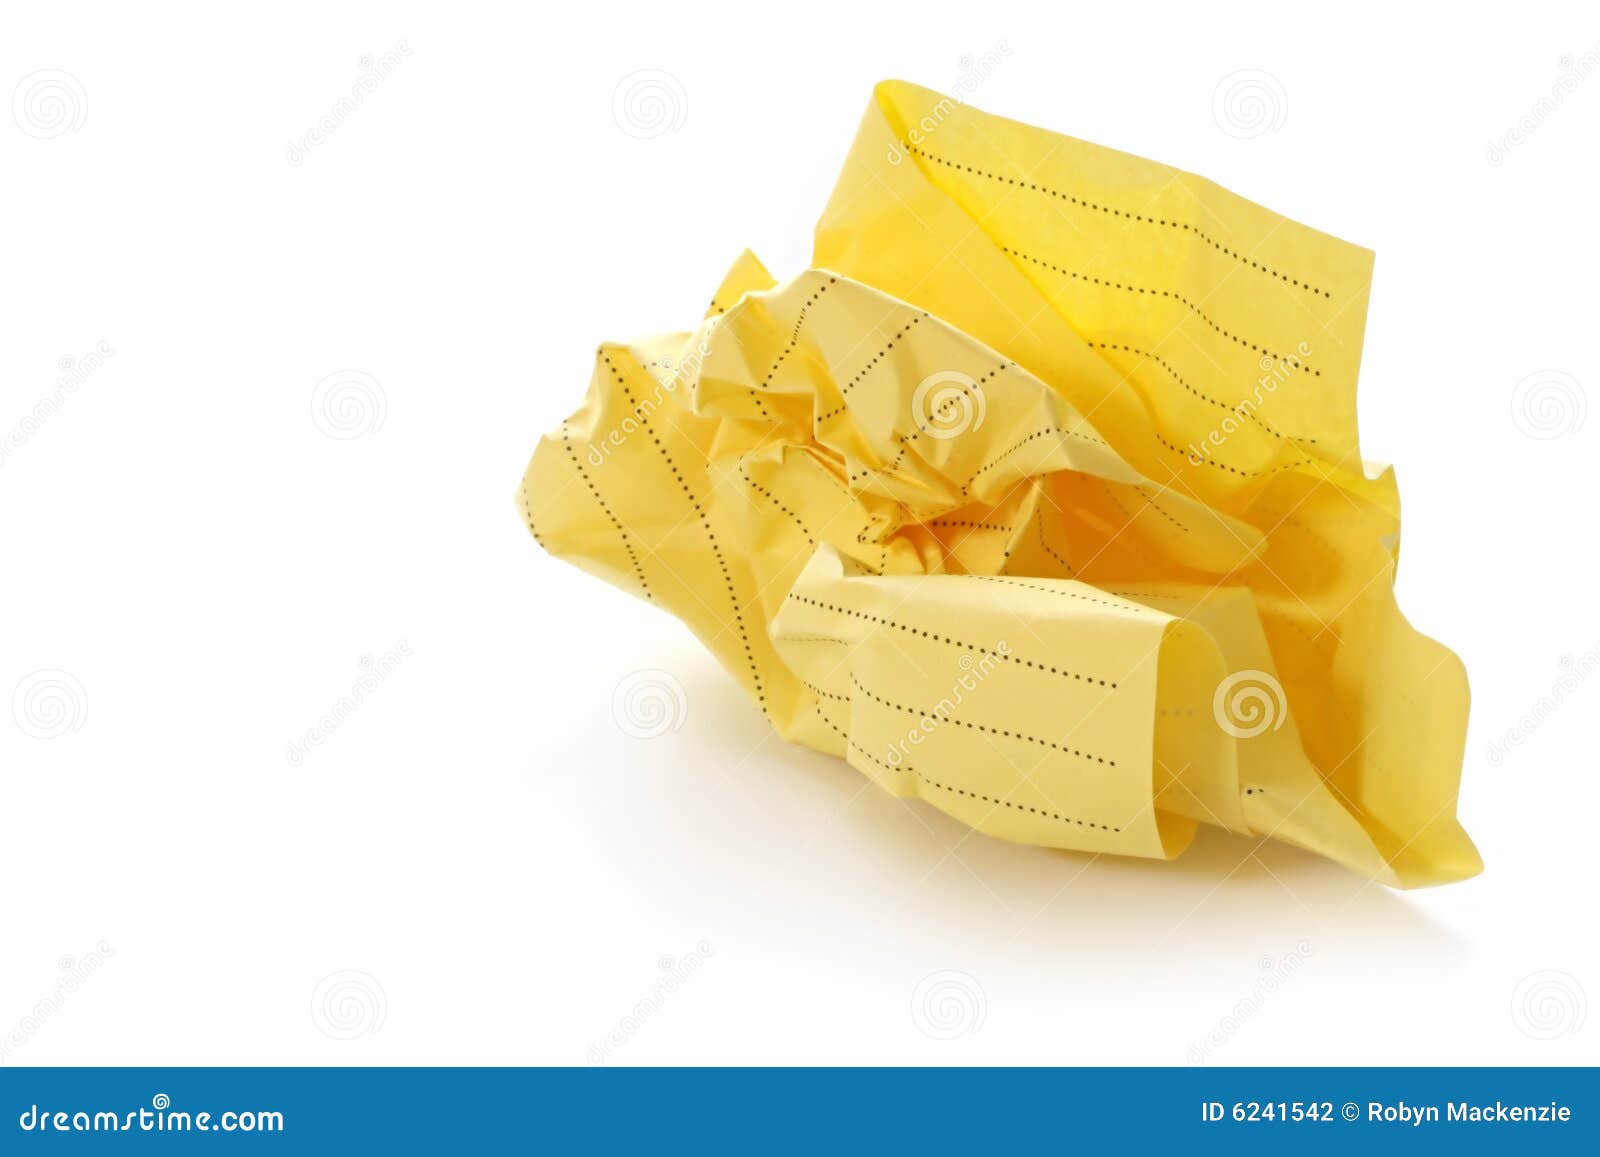 clipart crumpled paper - photo #48